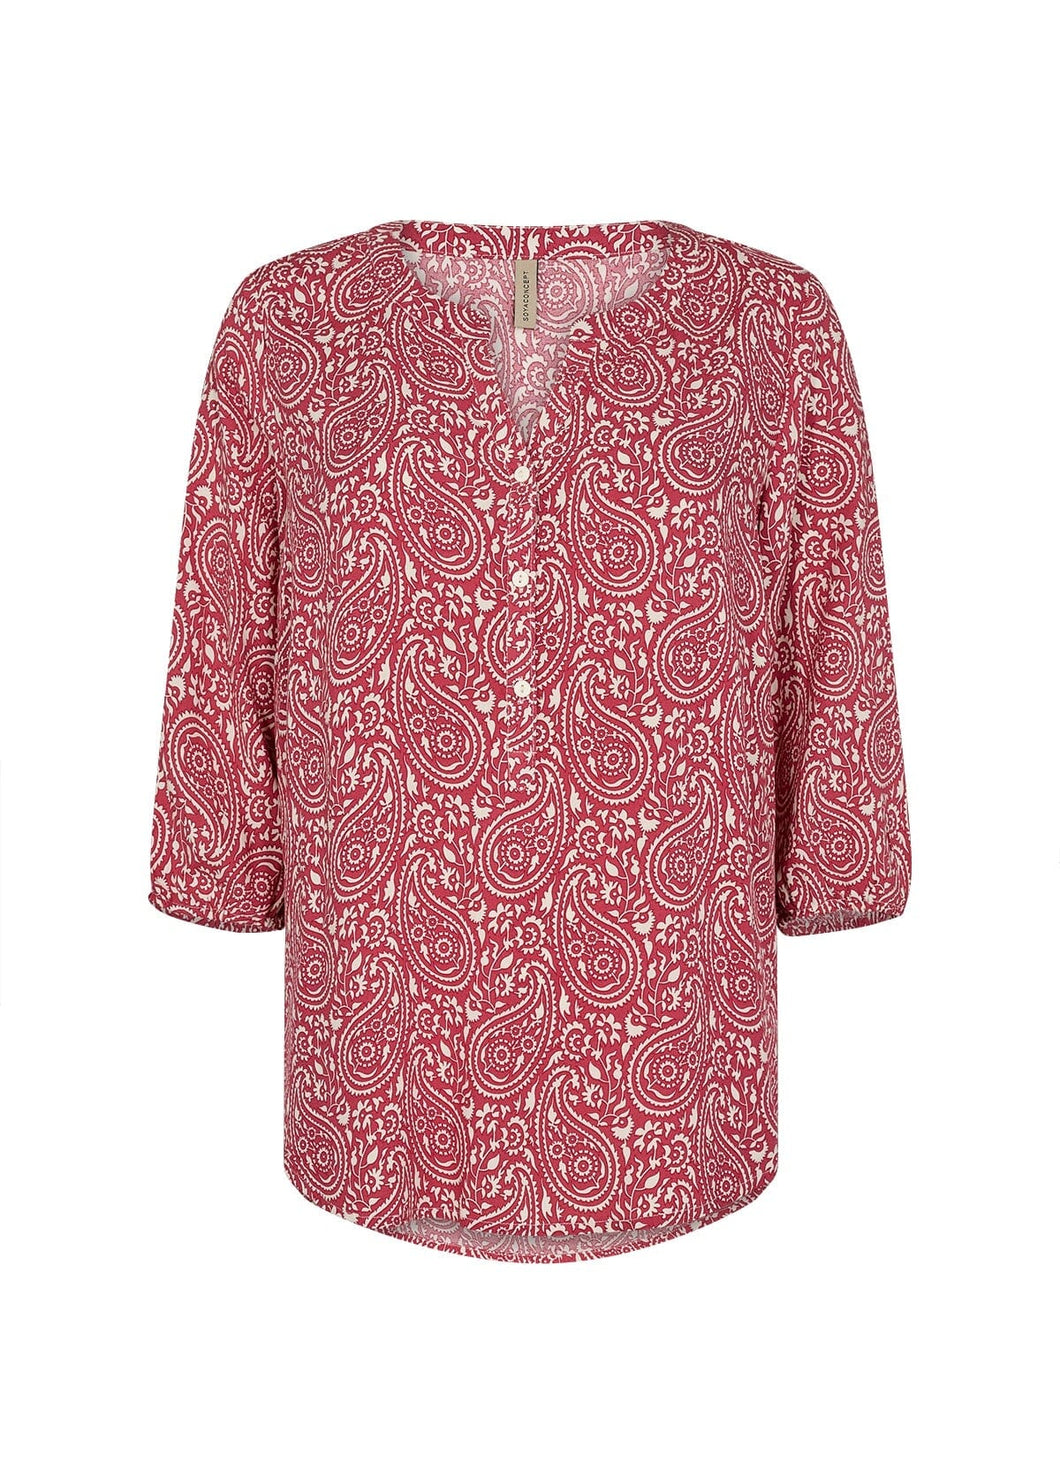 Molly 3/4 Sleeve Blouse in Berry Combi Blouse Soyaconcept 